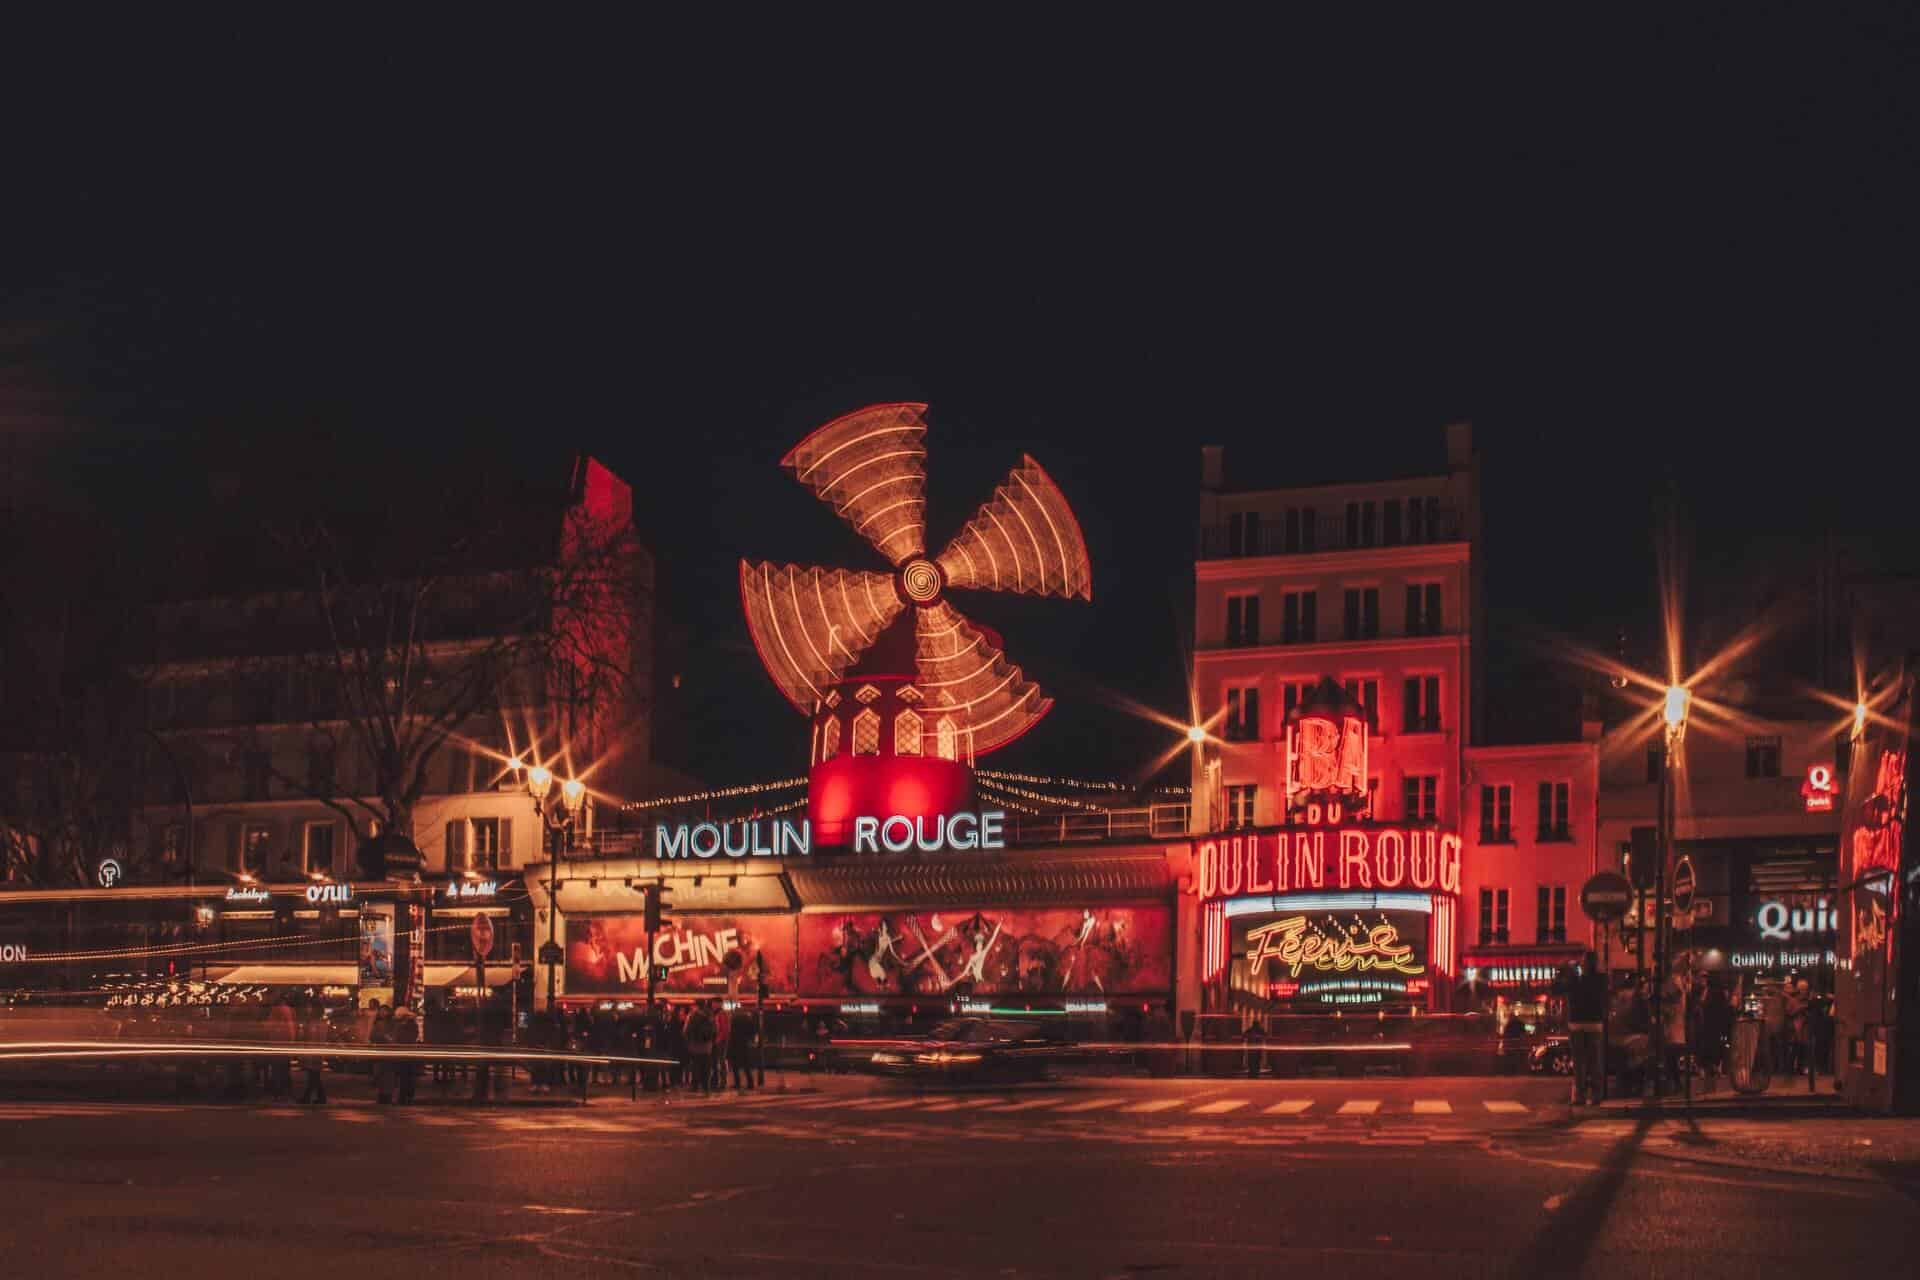 A photo of the outside of the Moulin Rouge in Paris at night.